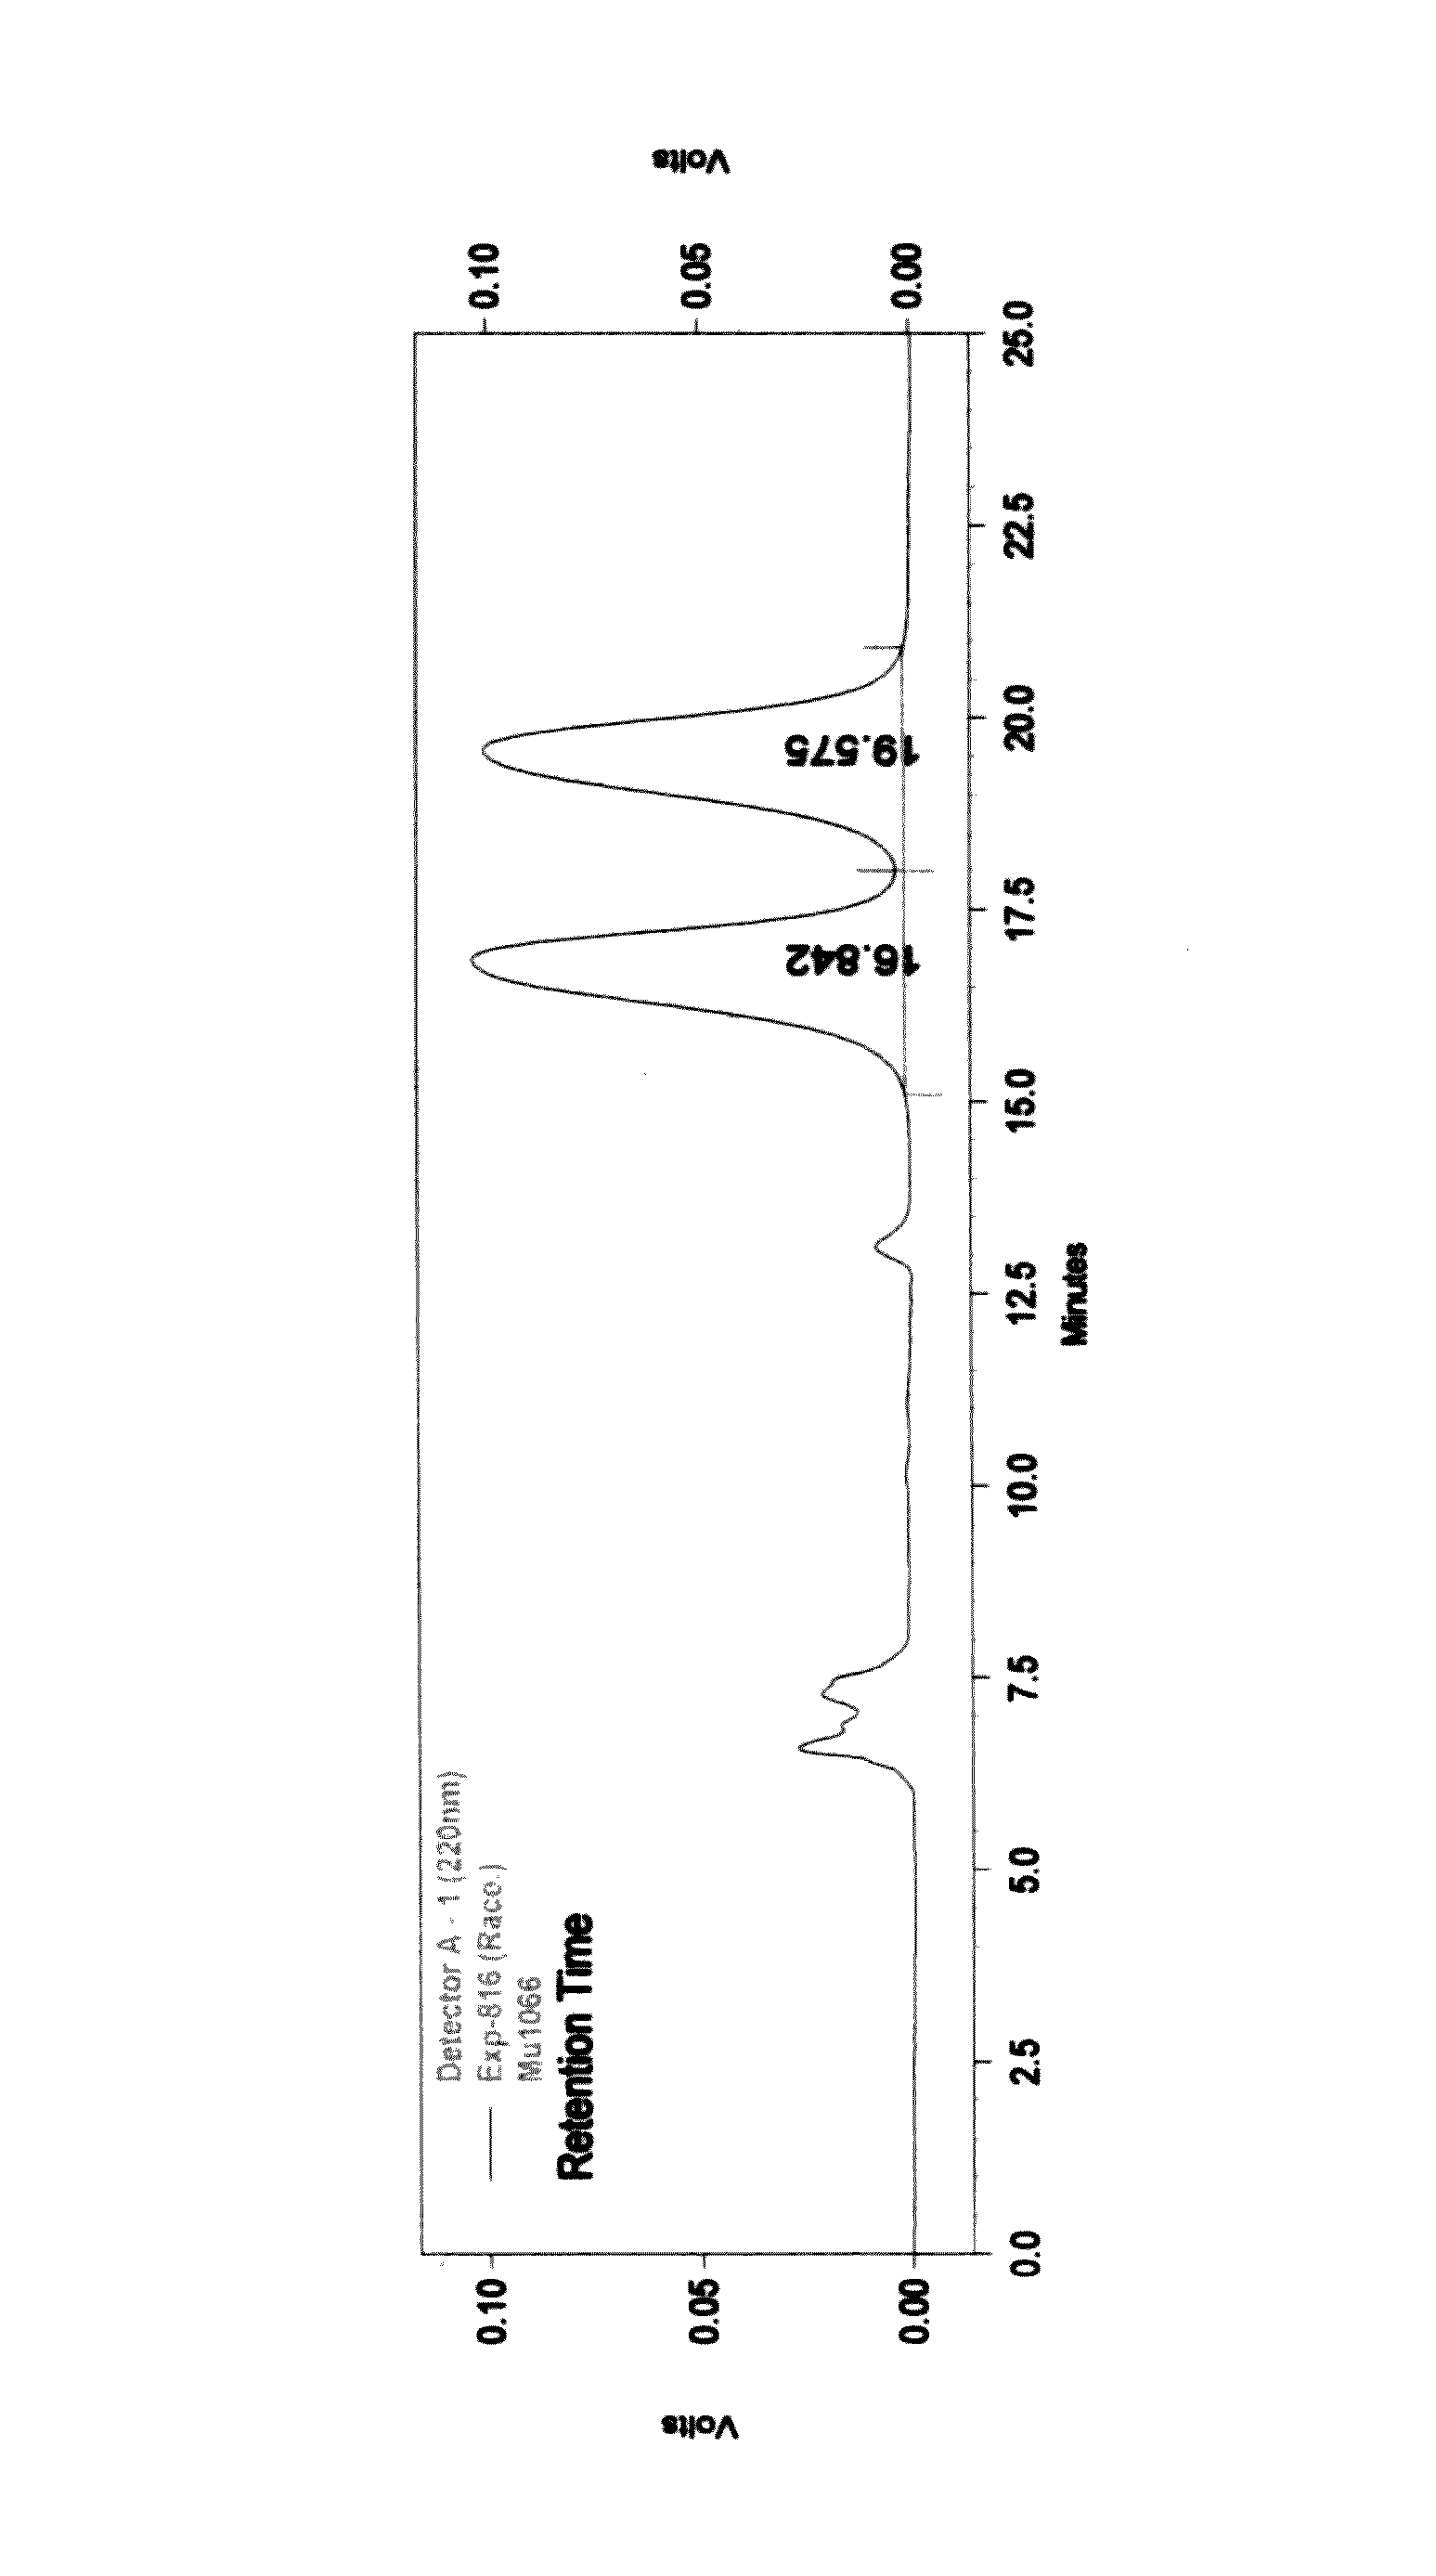 Process for the preparation of 3-aryl-2-hydroxy propanoic acid compounds